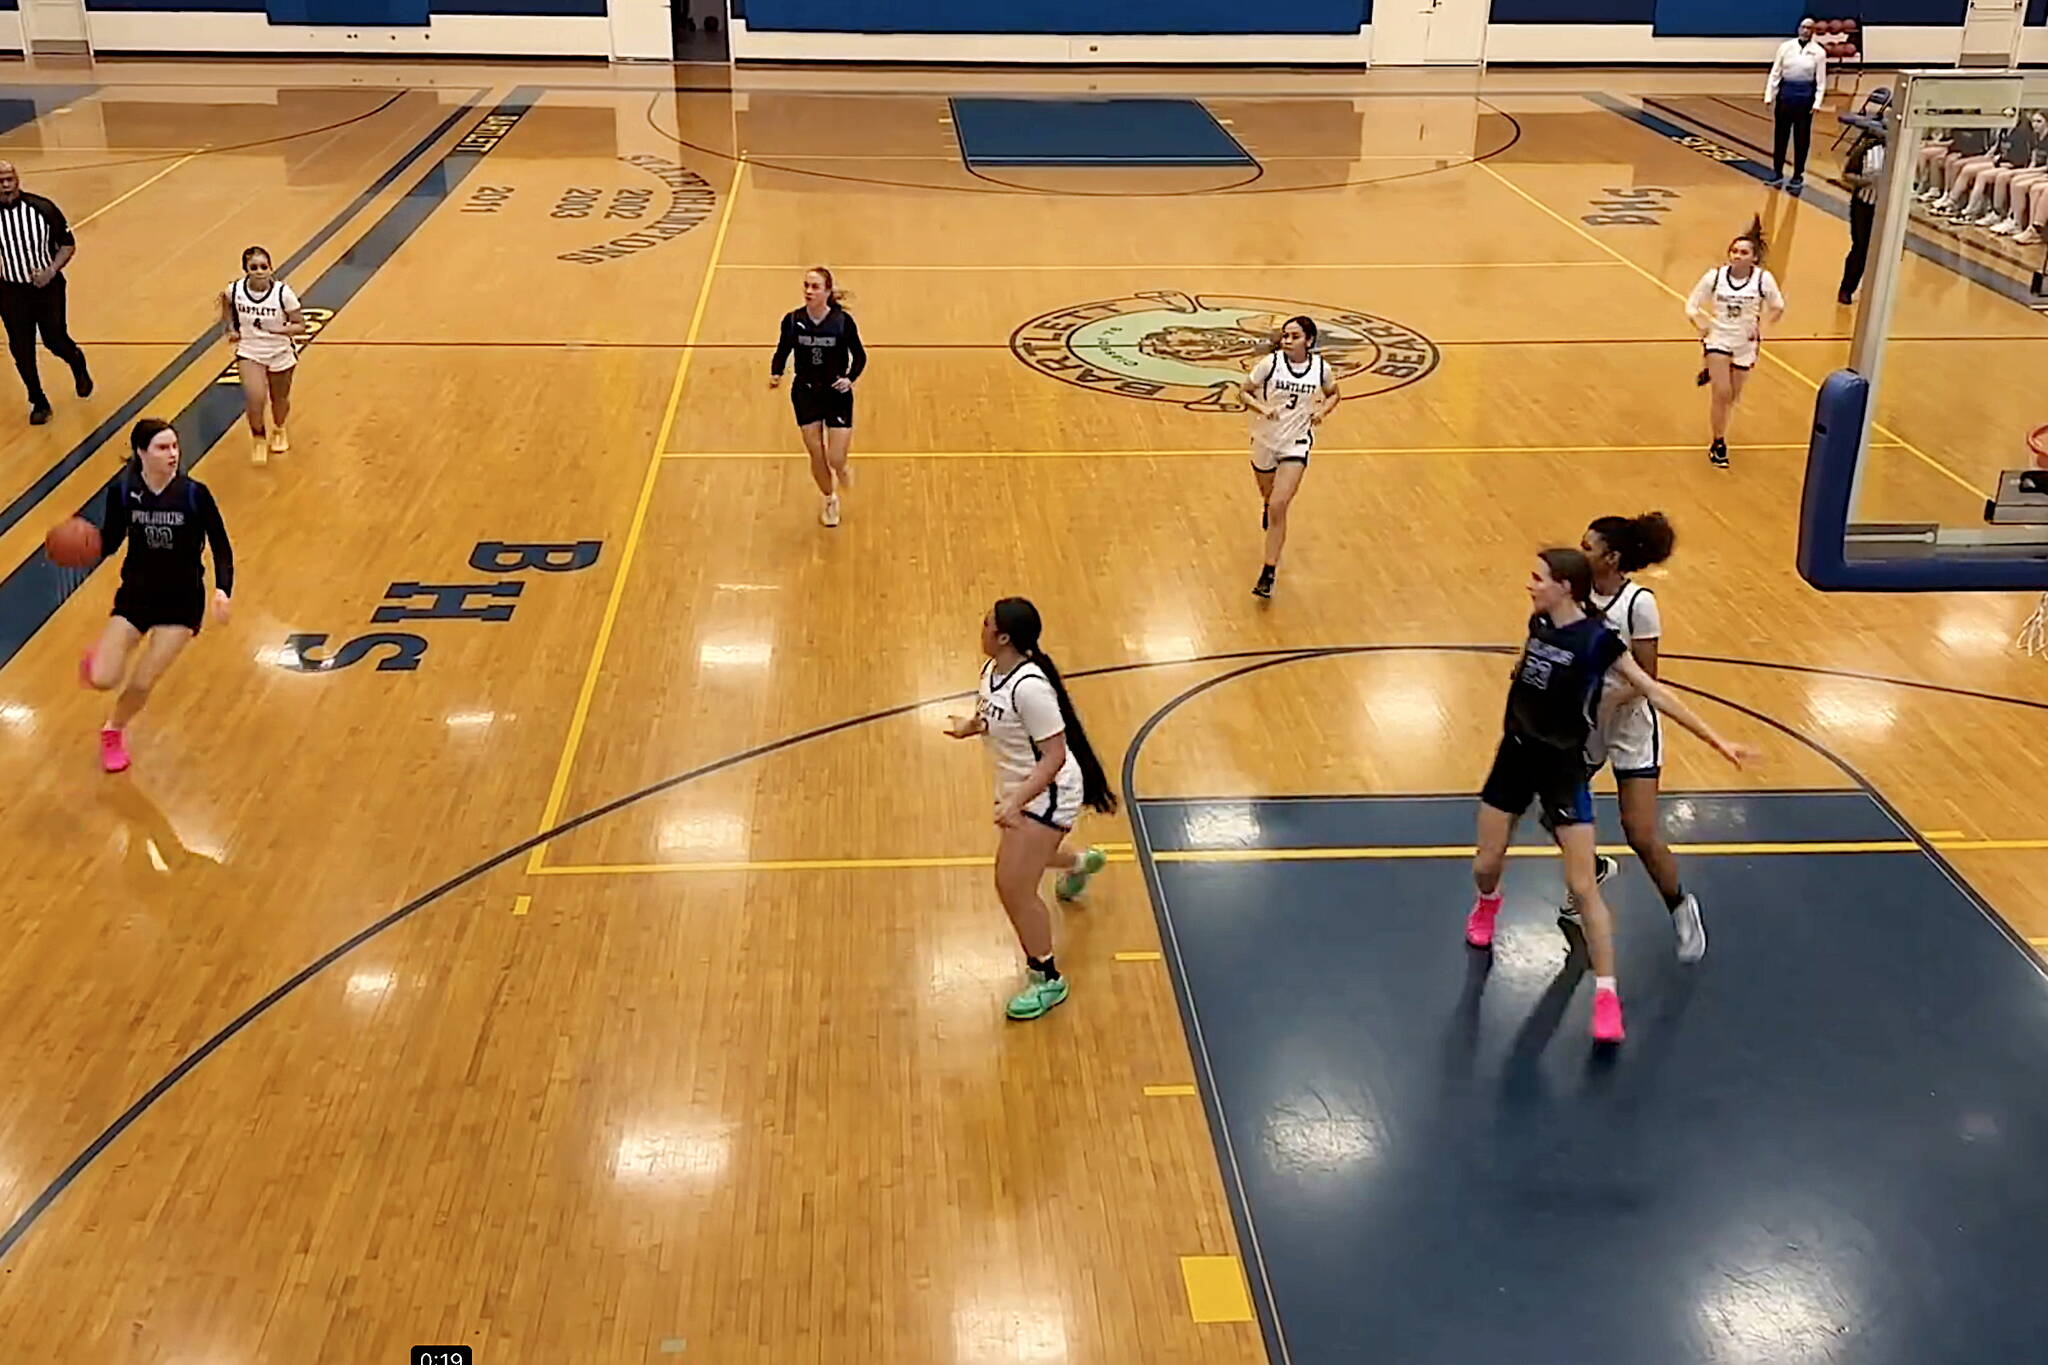 The Thunder Mountain High School girls’ basketball team runs a fast break against Bartlett High School on Friday in Anchorage. The Falcons, who played their first nine games on the road, open at home on Thursday against South Anchorage High School. (Screenshot from Thunder Mountain High School video)